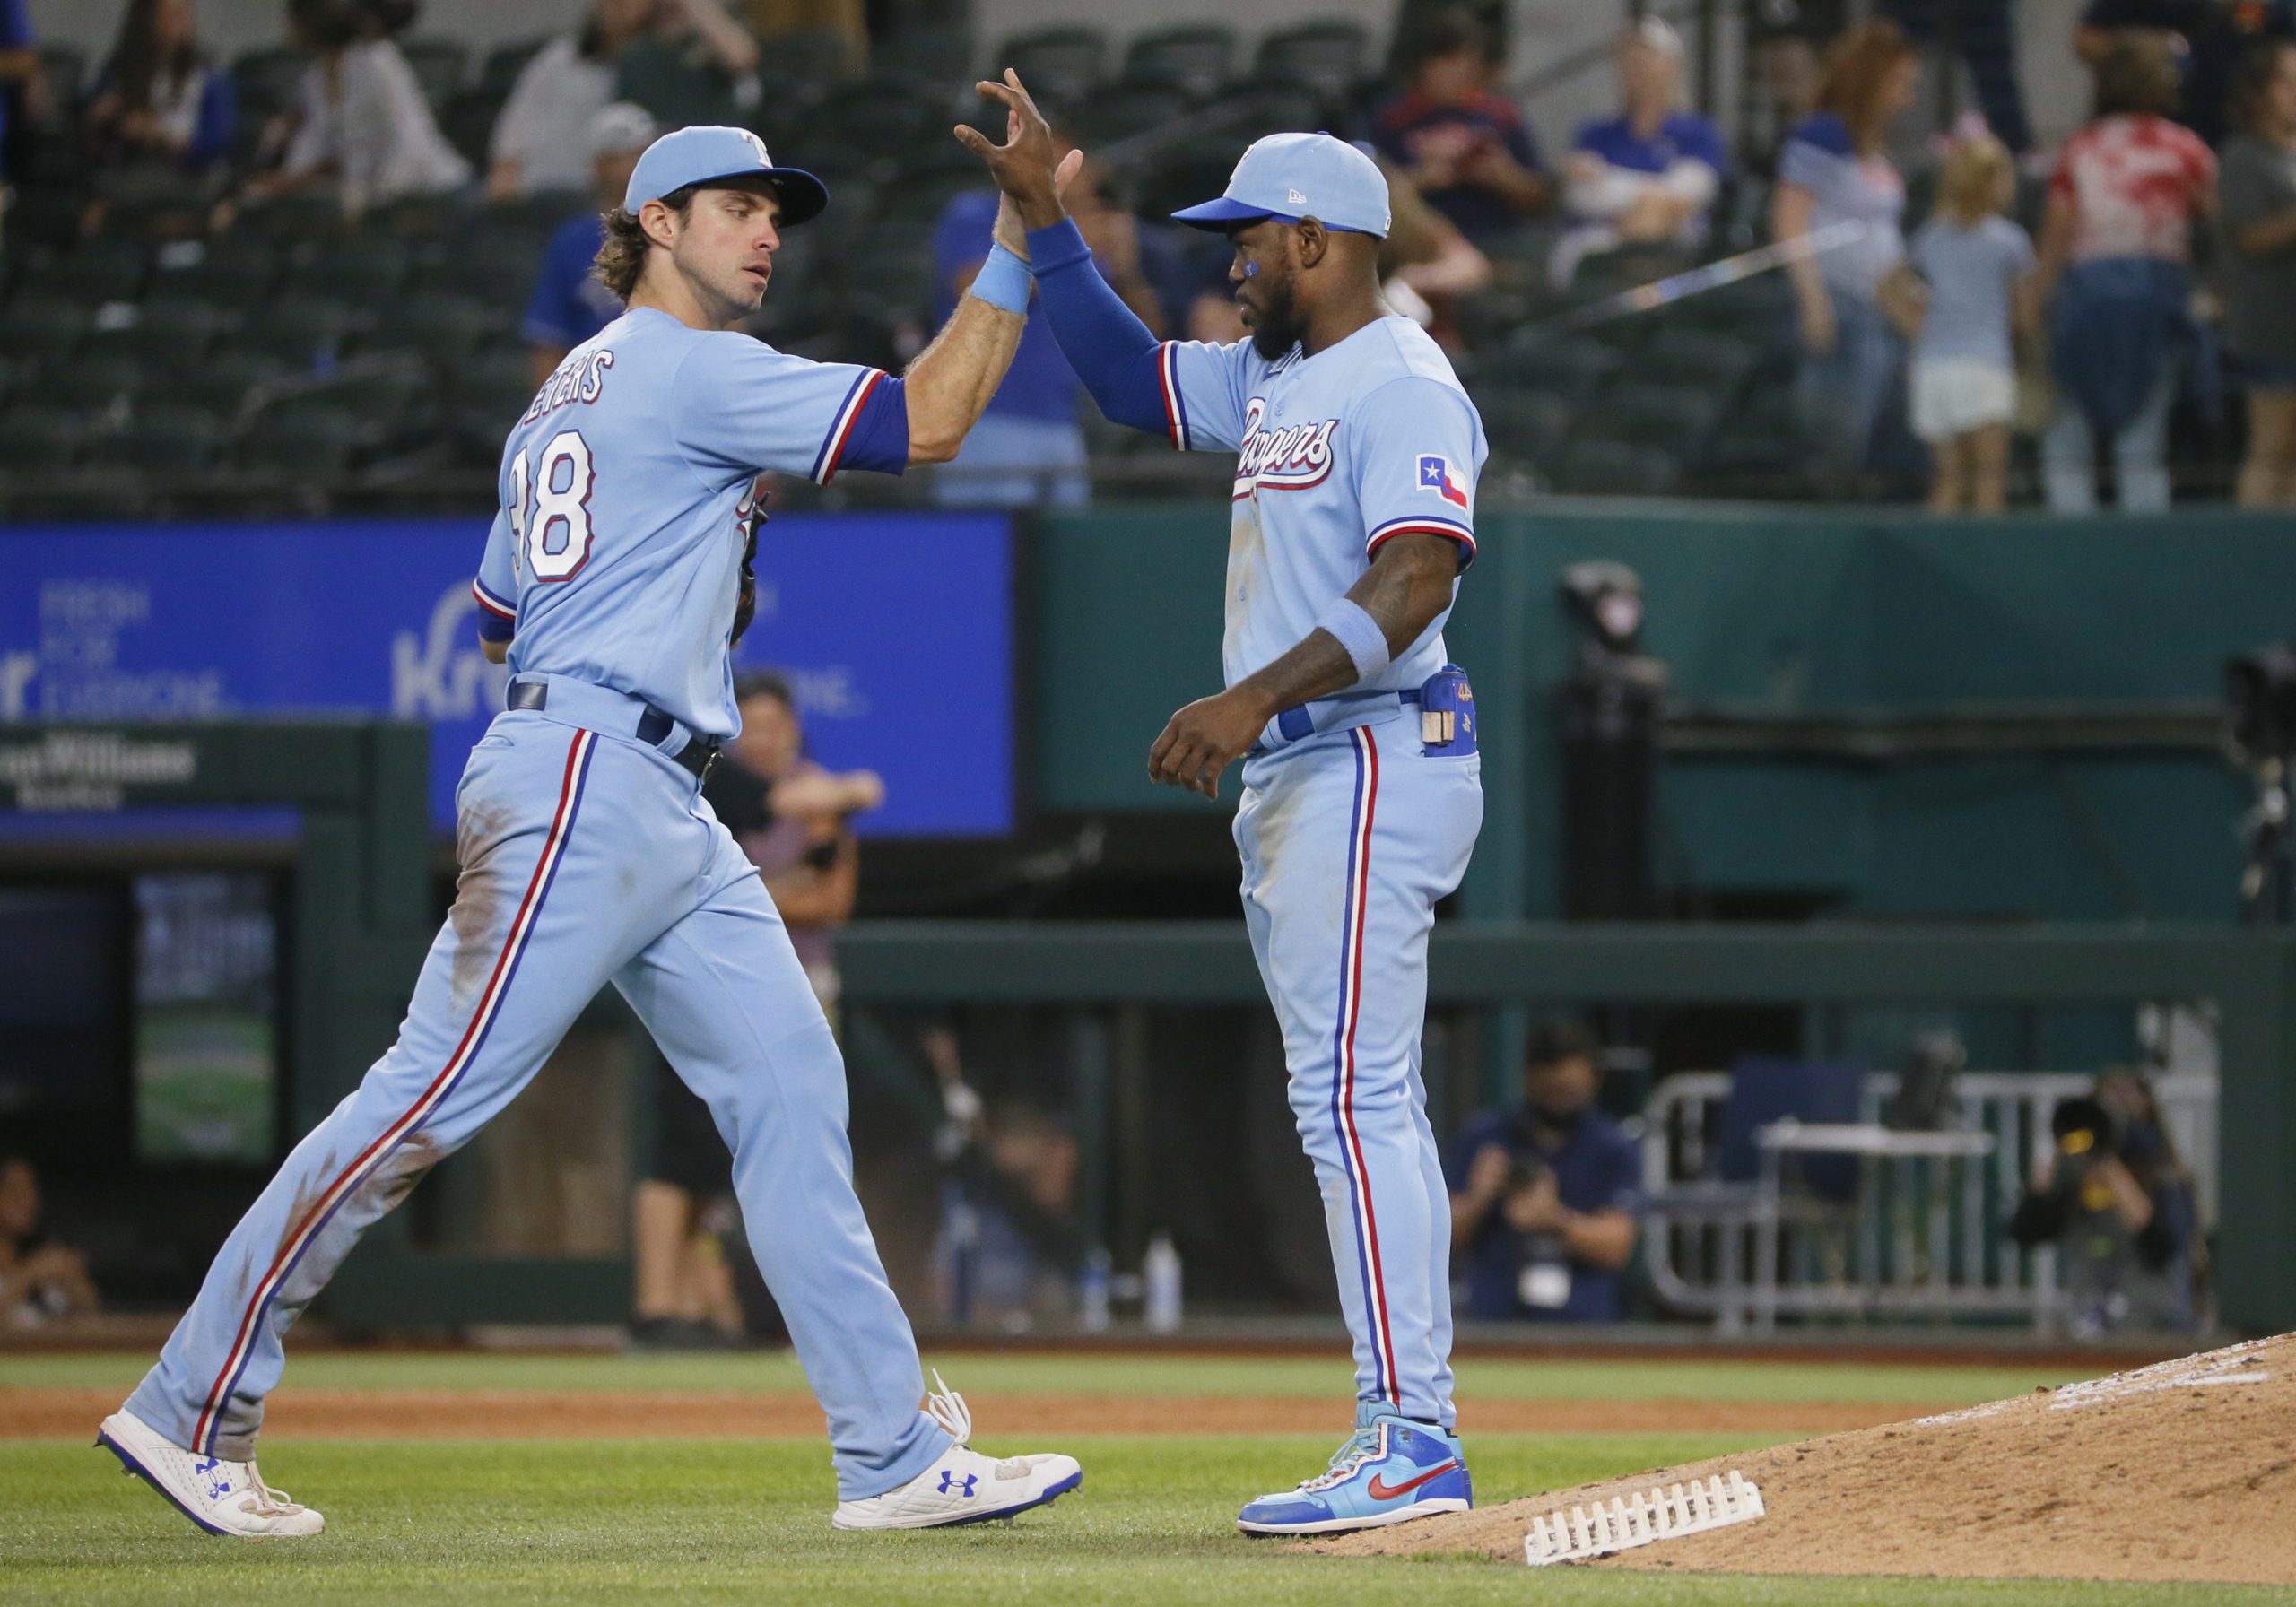 Texas Rangers center fielder DJ Peters (38) high fives right fielder Adolis Garcia (53) following the game against the Houston Astros at Globe Life Field